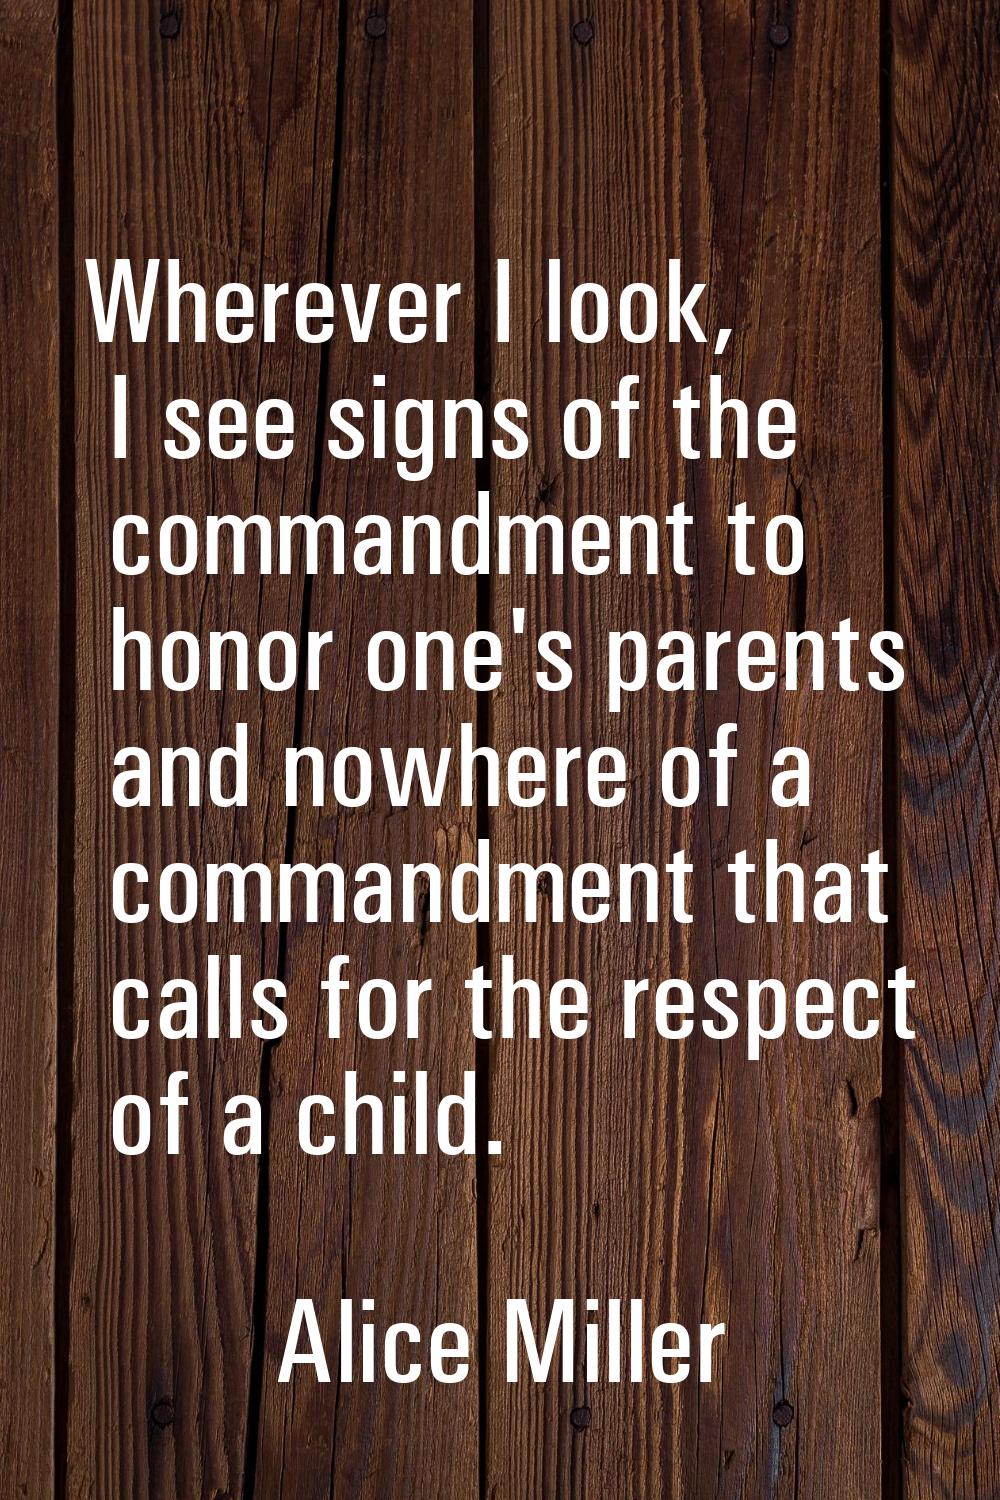 Wherever I look, I see signs of the commandment to honor one's parents and nowhere of a commandment